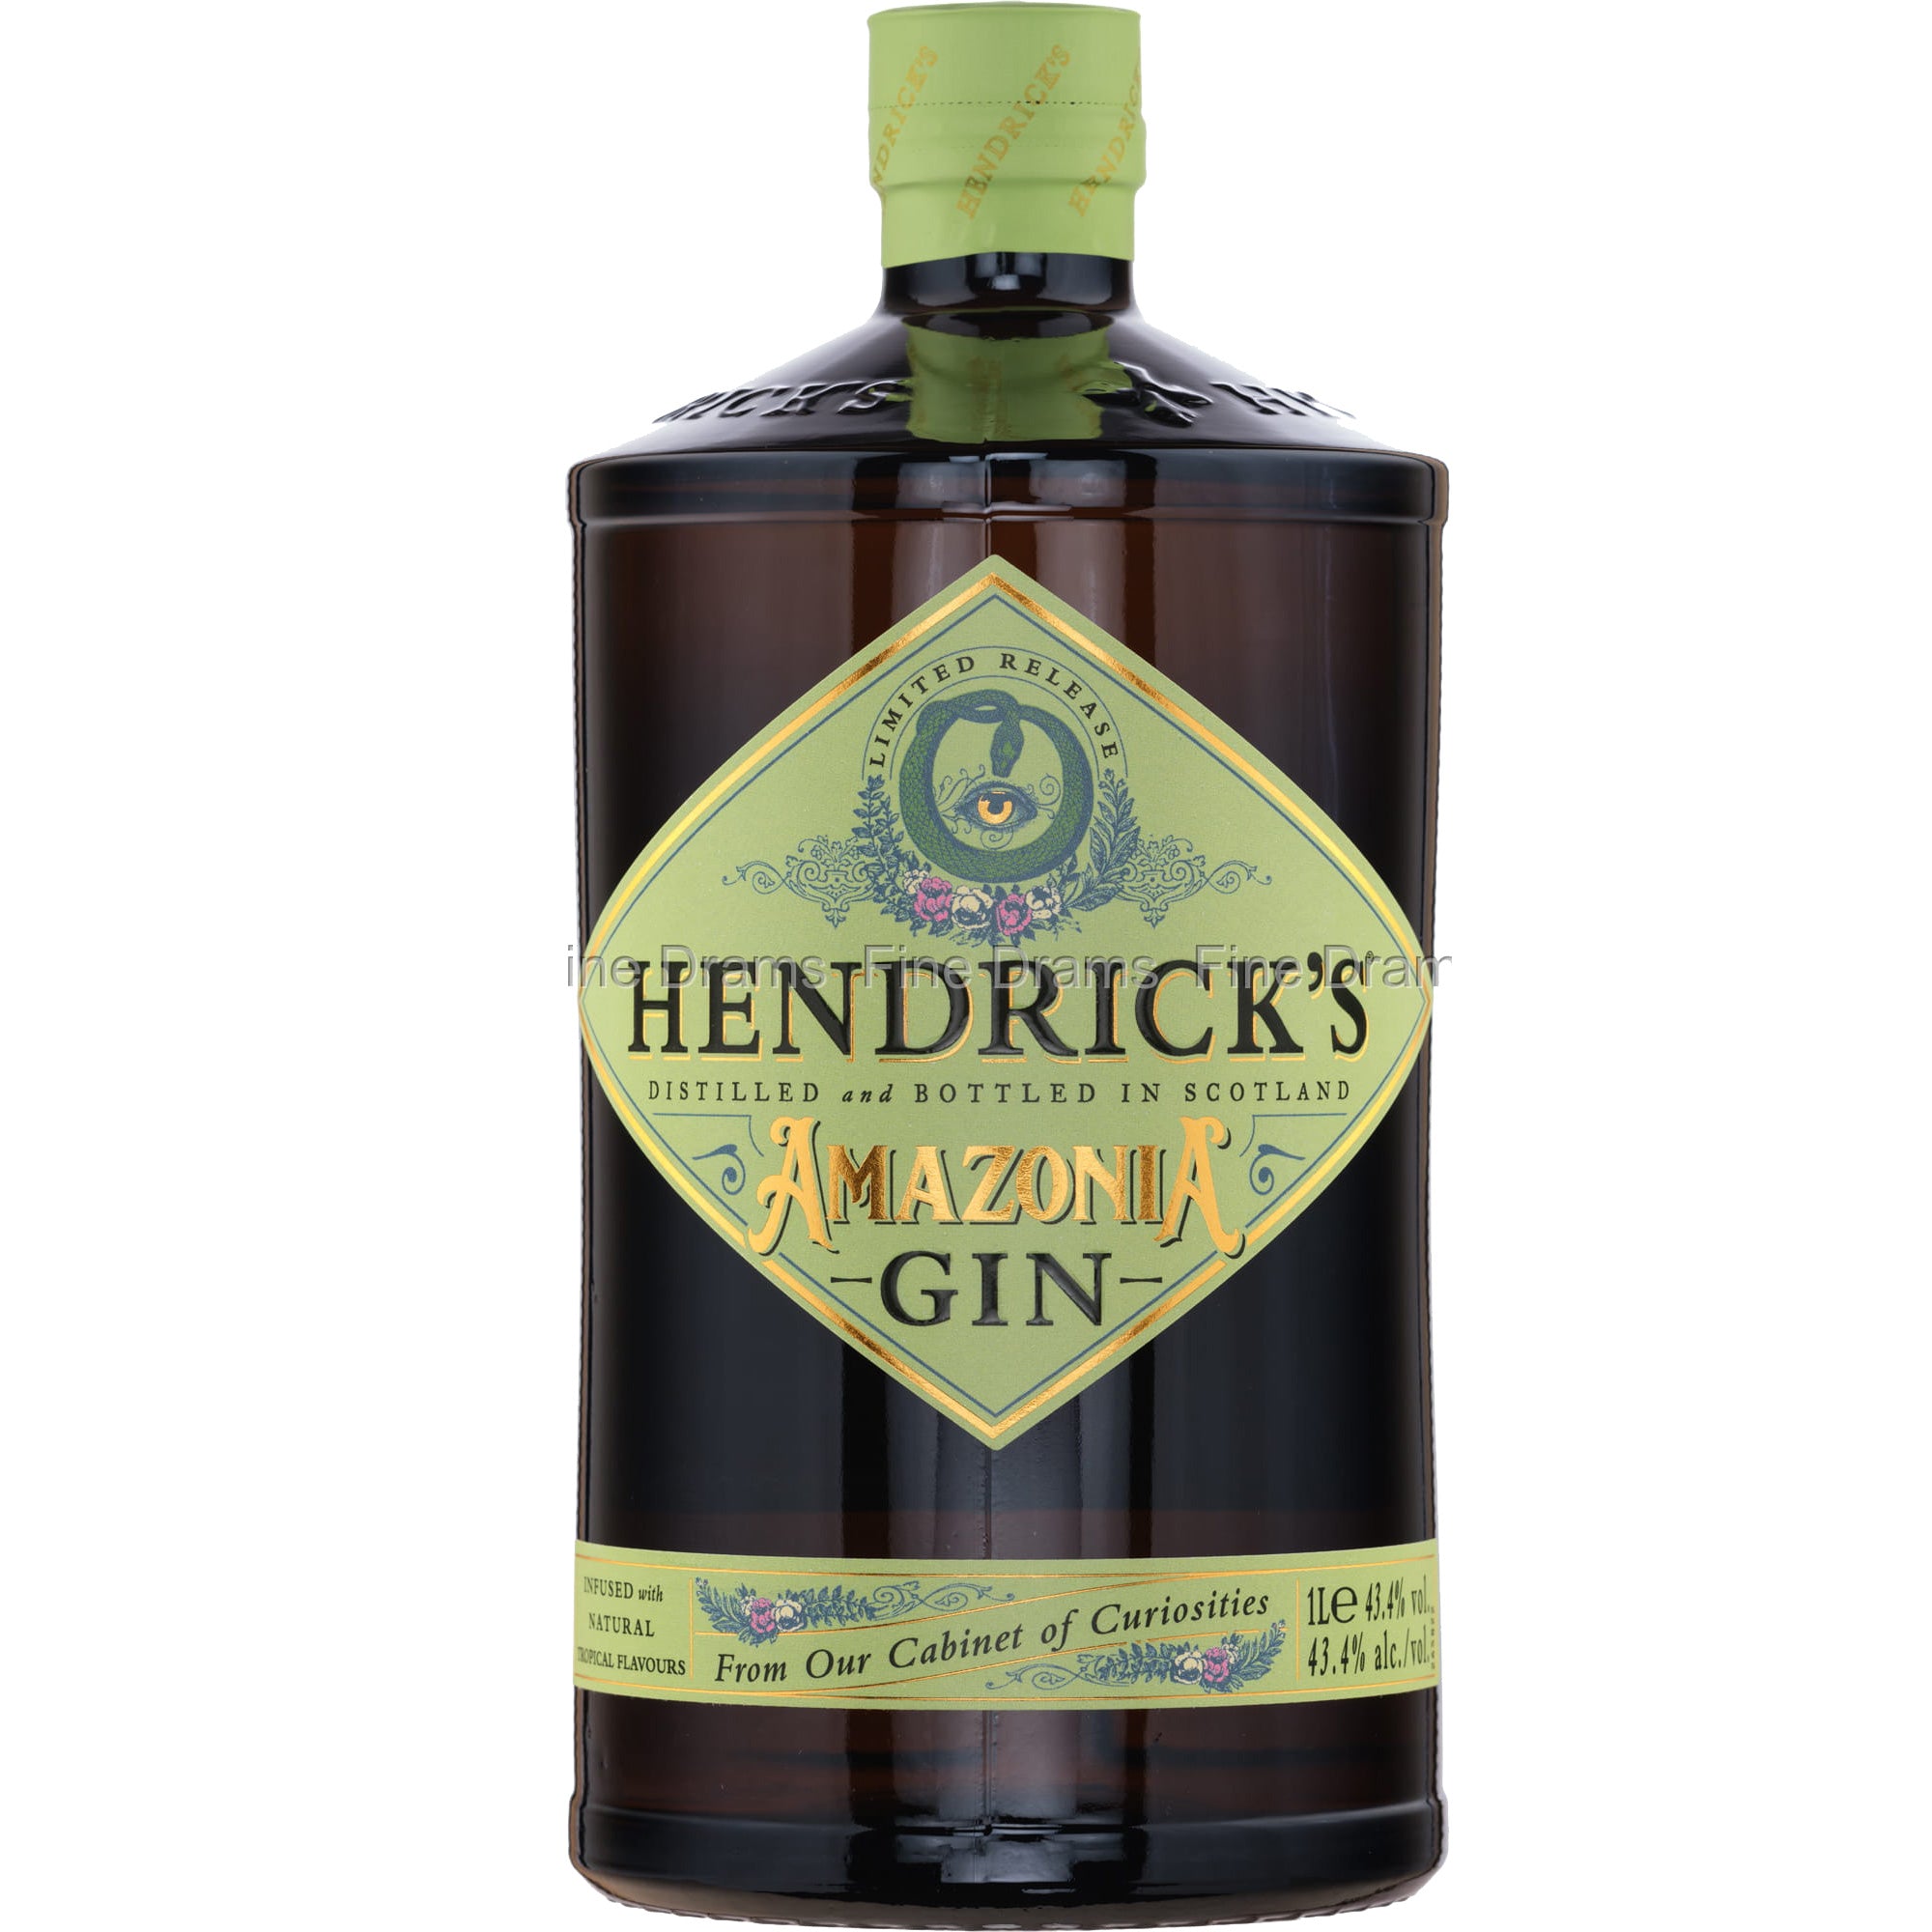 Discover the Hendrick's Gin 1L